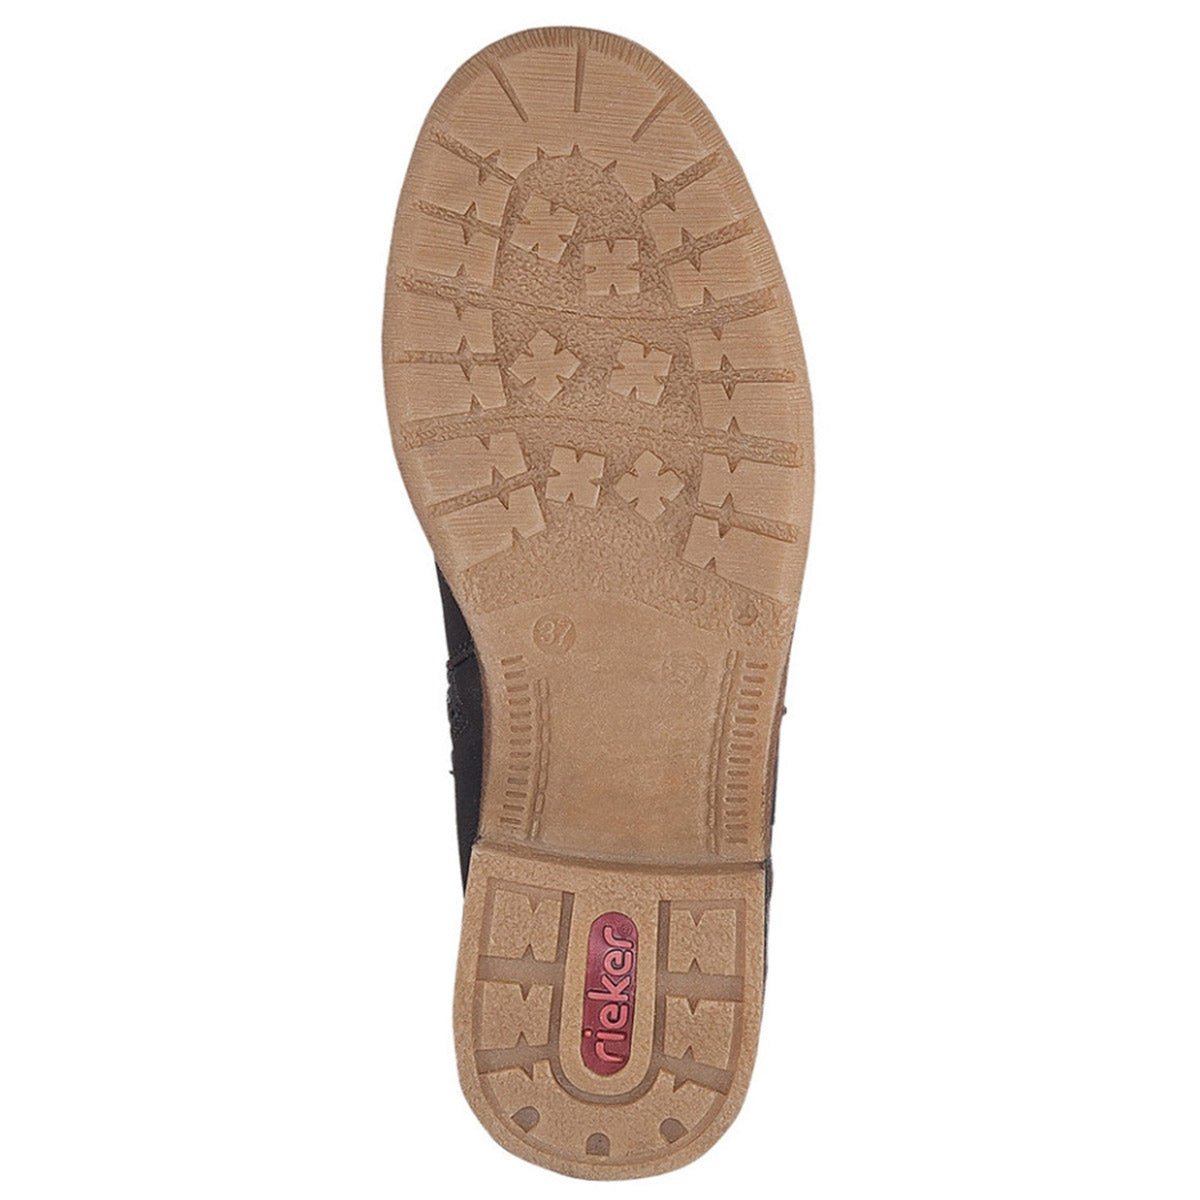 Tan sole of a Rieker RIEKER FABRIZIA 52 BLACK - WOMENS shoe featuring a tread pattern with circular and cross-shaped indentations, red logo branding near the heel, and a cushioned footbed for enhanced comfort.